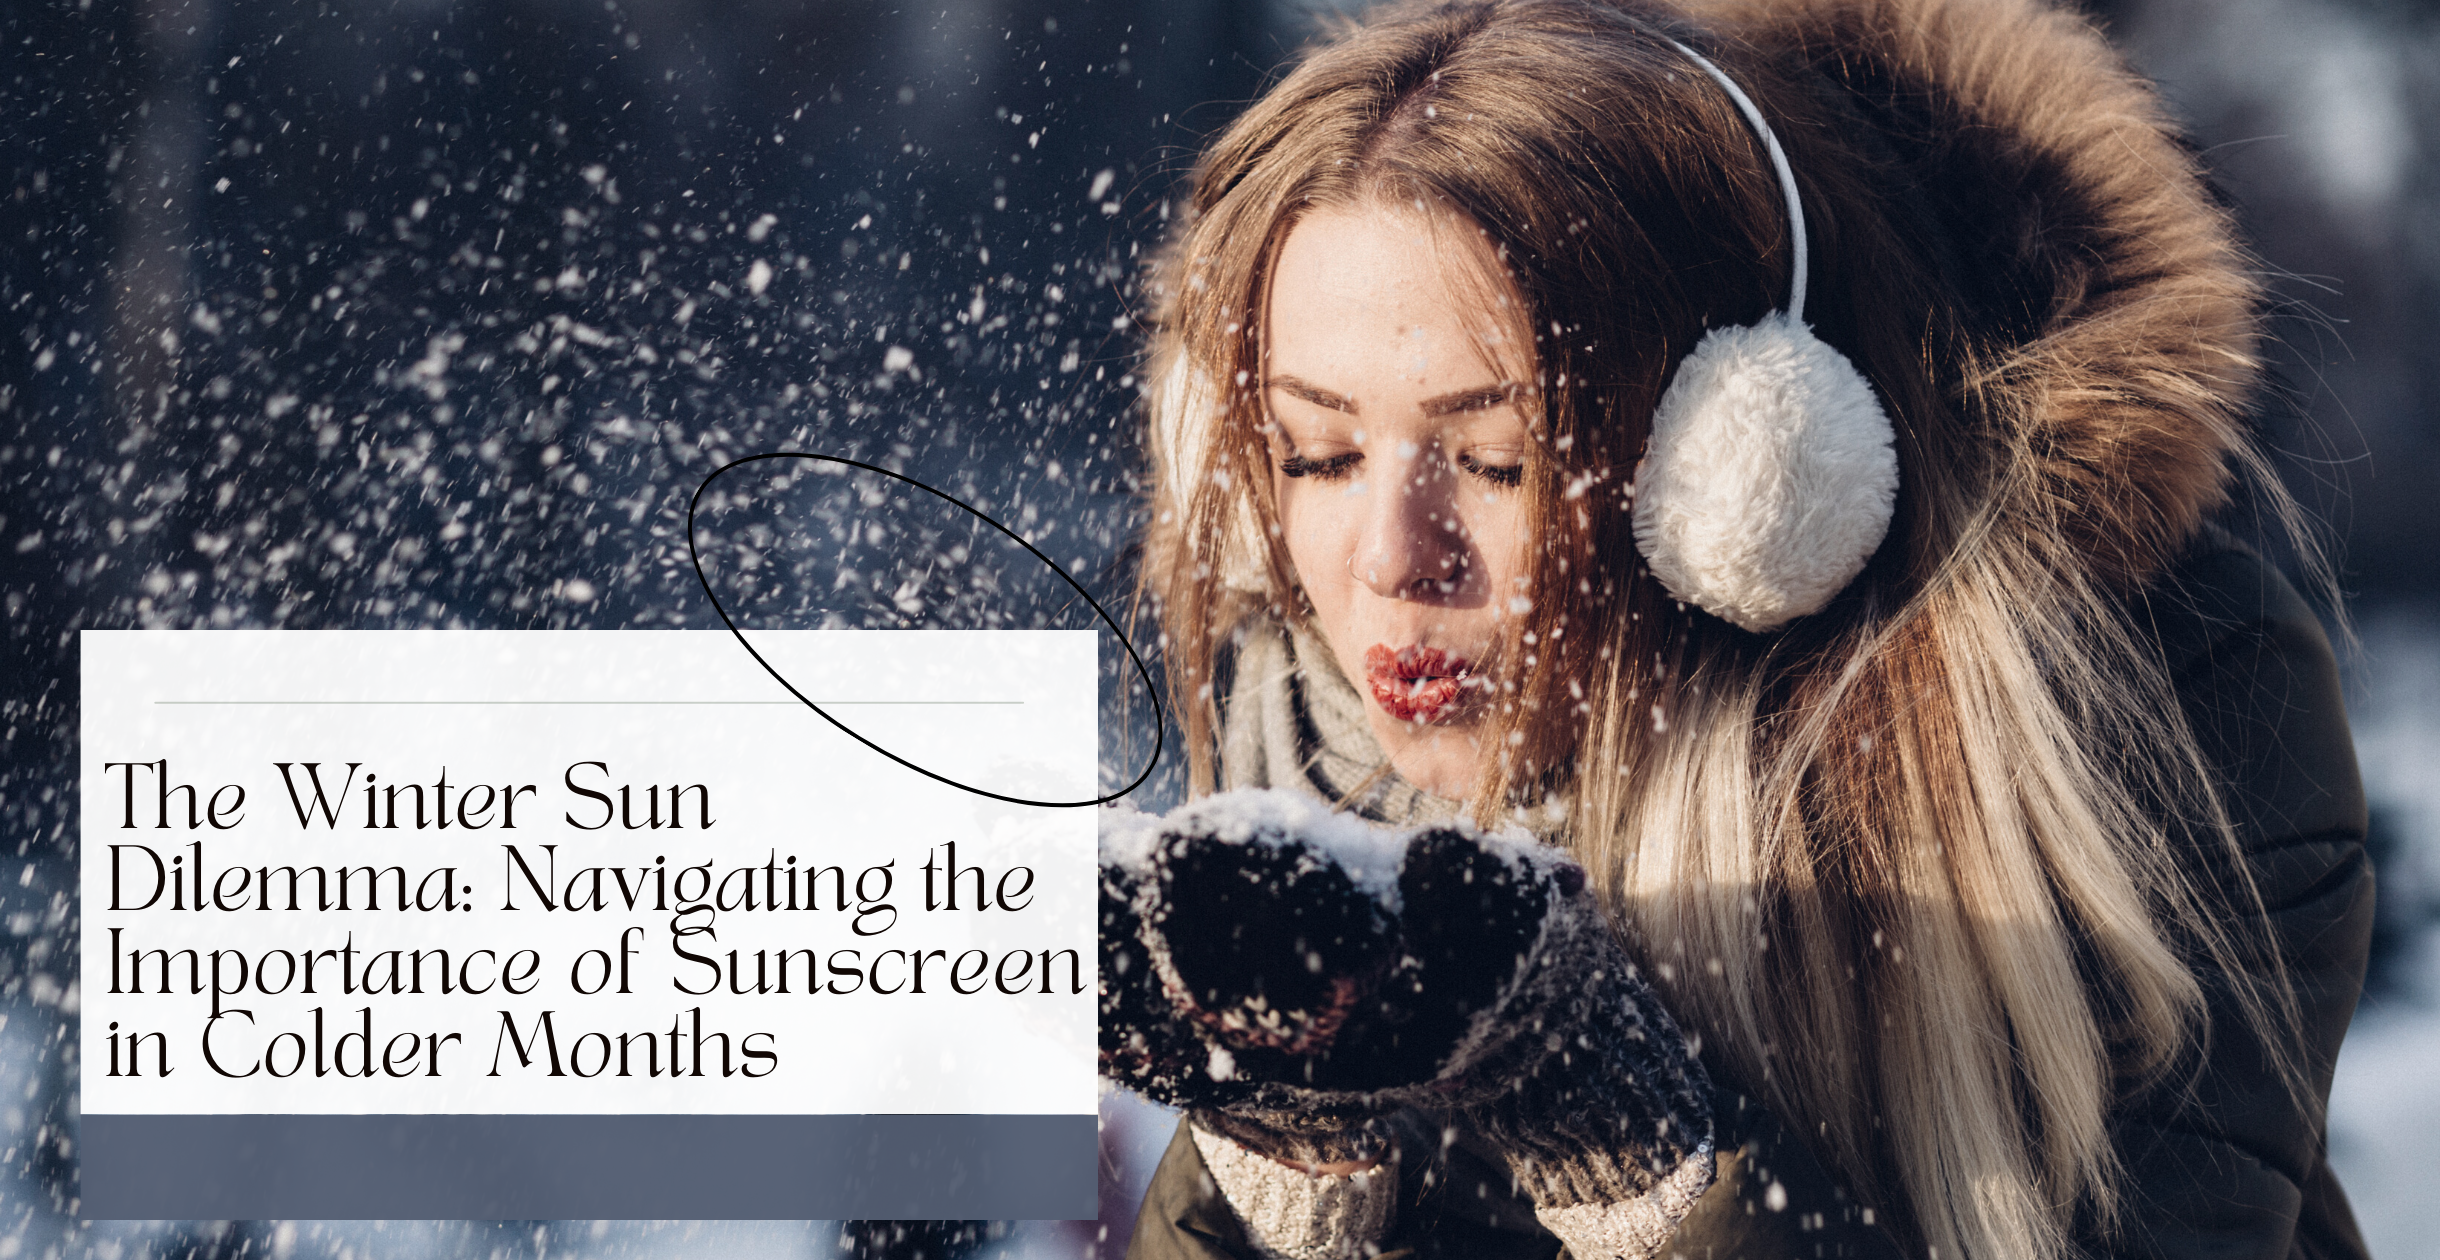 The Winter Sun Dilemma: Navigating the Importance of Sunscreen in Colder Months